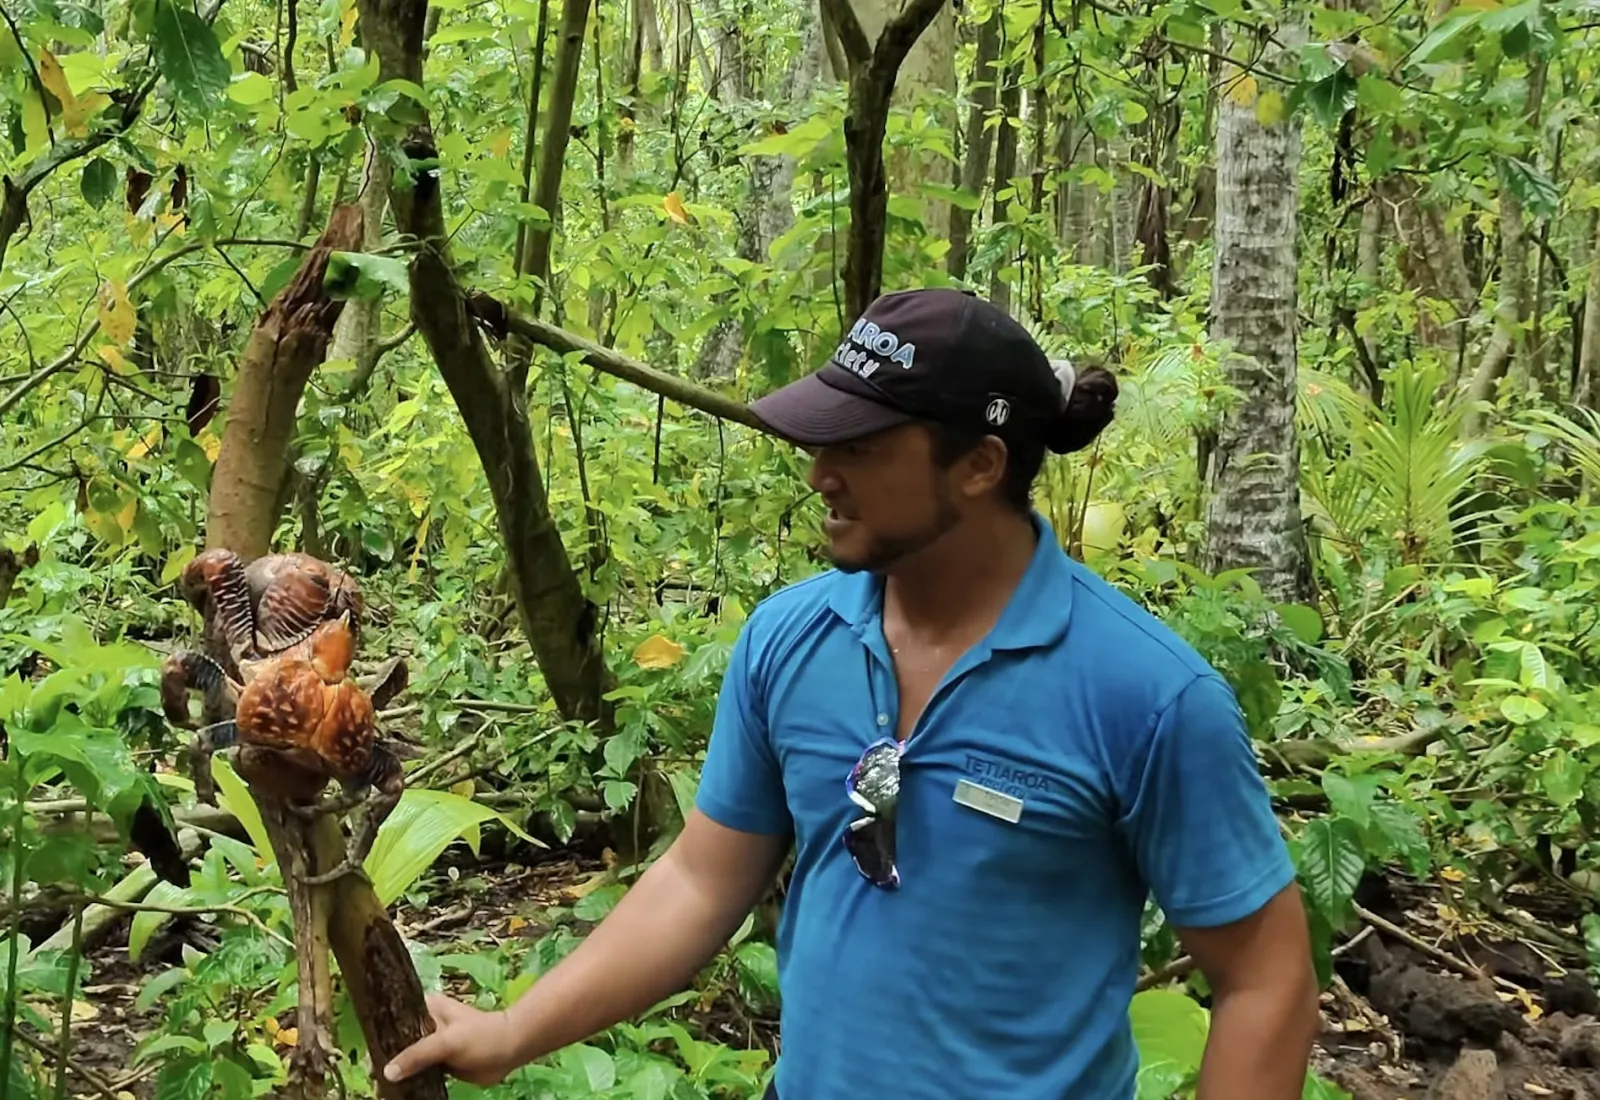 Tihoni showing a coconut crab to atoll visitors